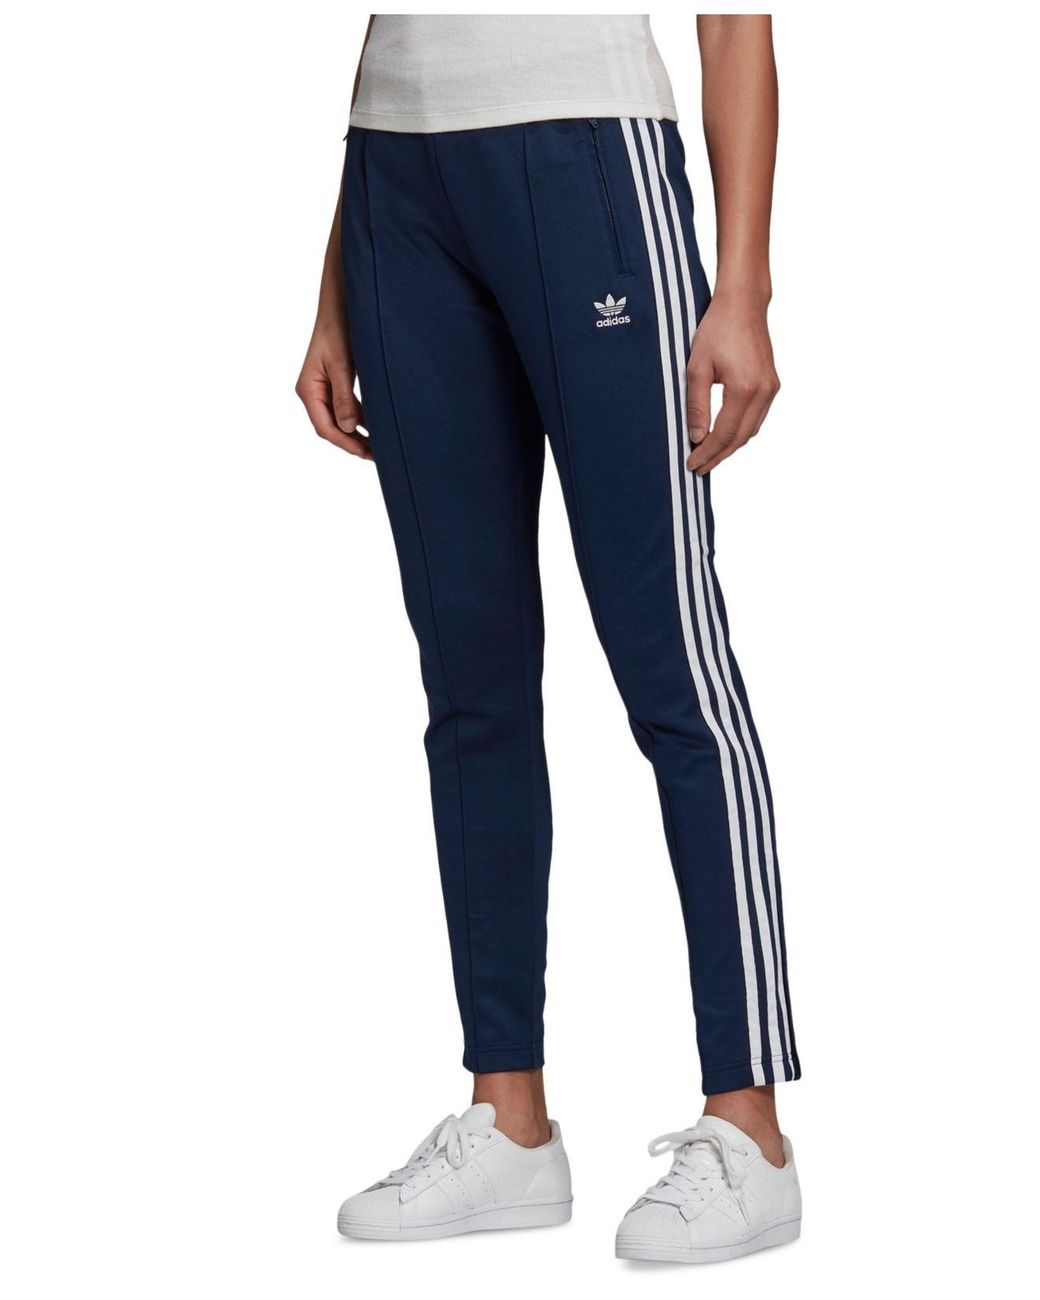 adidas Cotton Superstar Track Pants in Navy (Blue) - Lyst